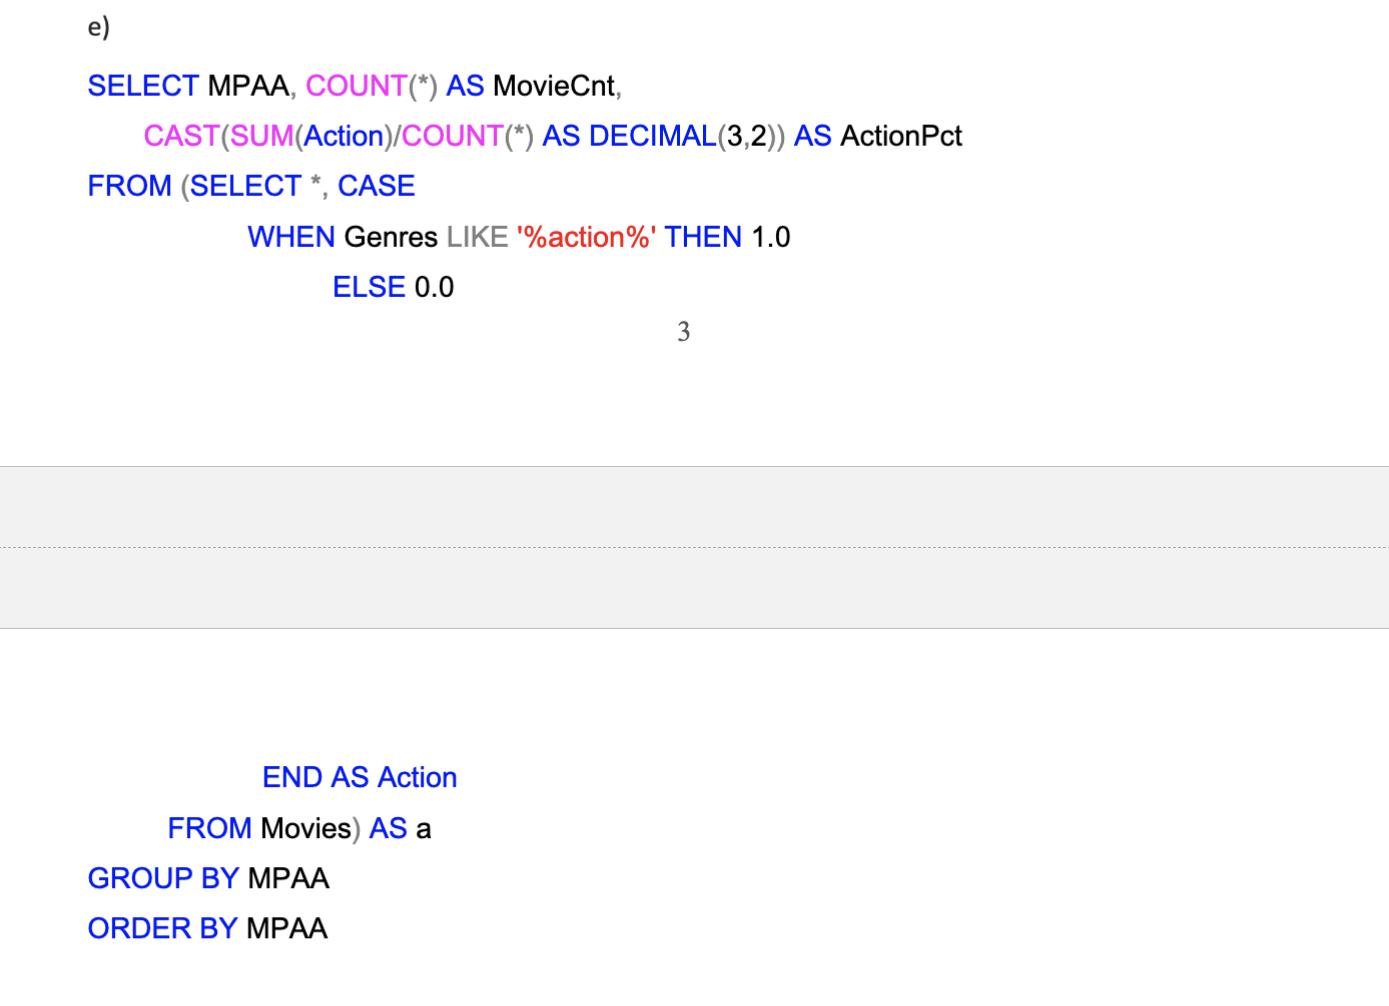 e) SELECT MPAA, COUNT(*) AS MovieCnt, CAST(SUM(Action)/COUNT(*) AS DECIMAL (3,2)) AS ActionPct FROM (SELECT